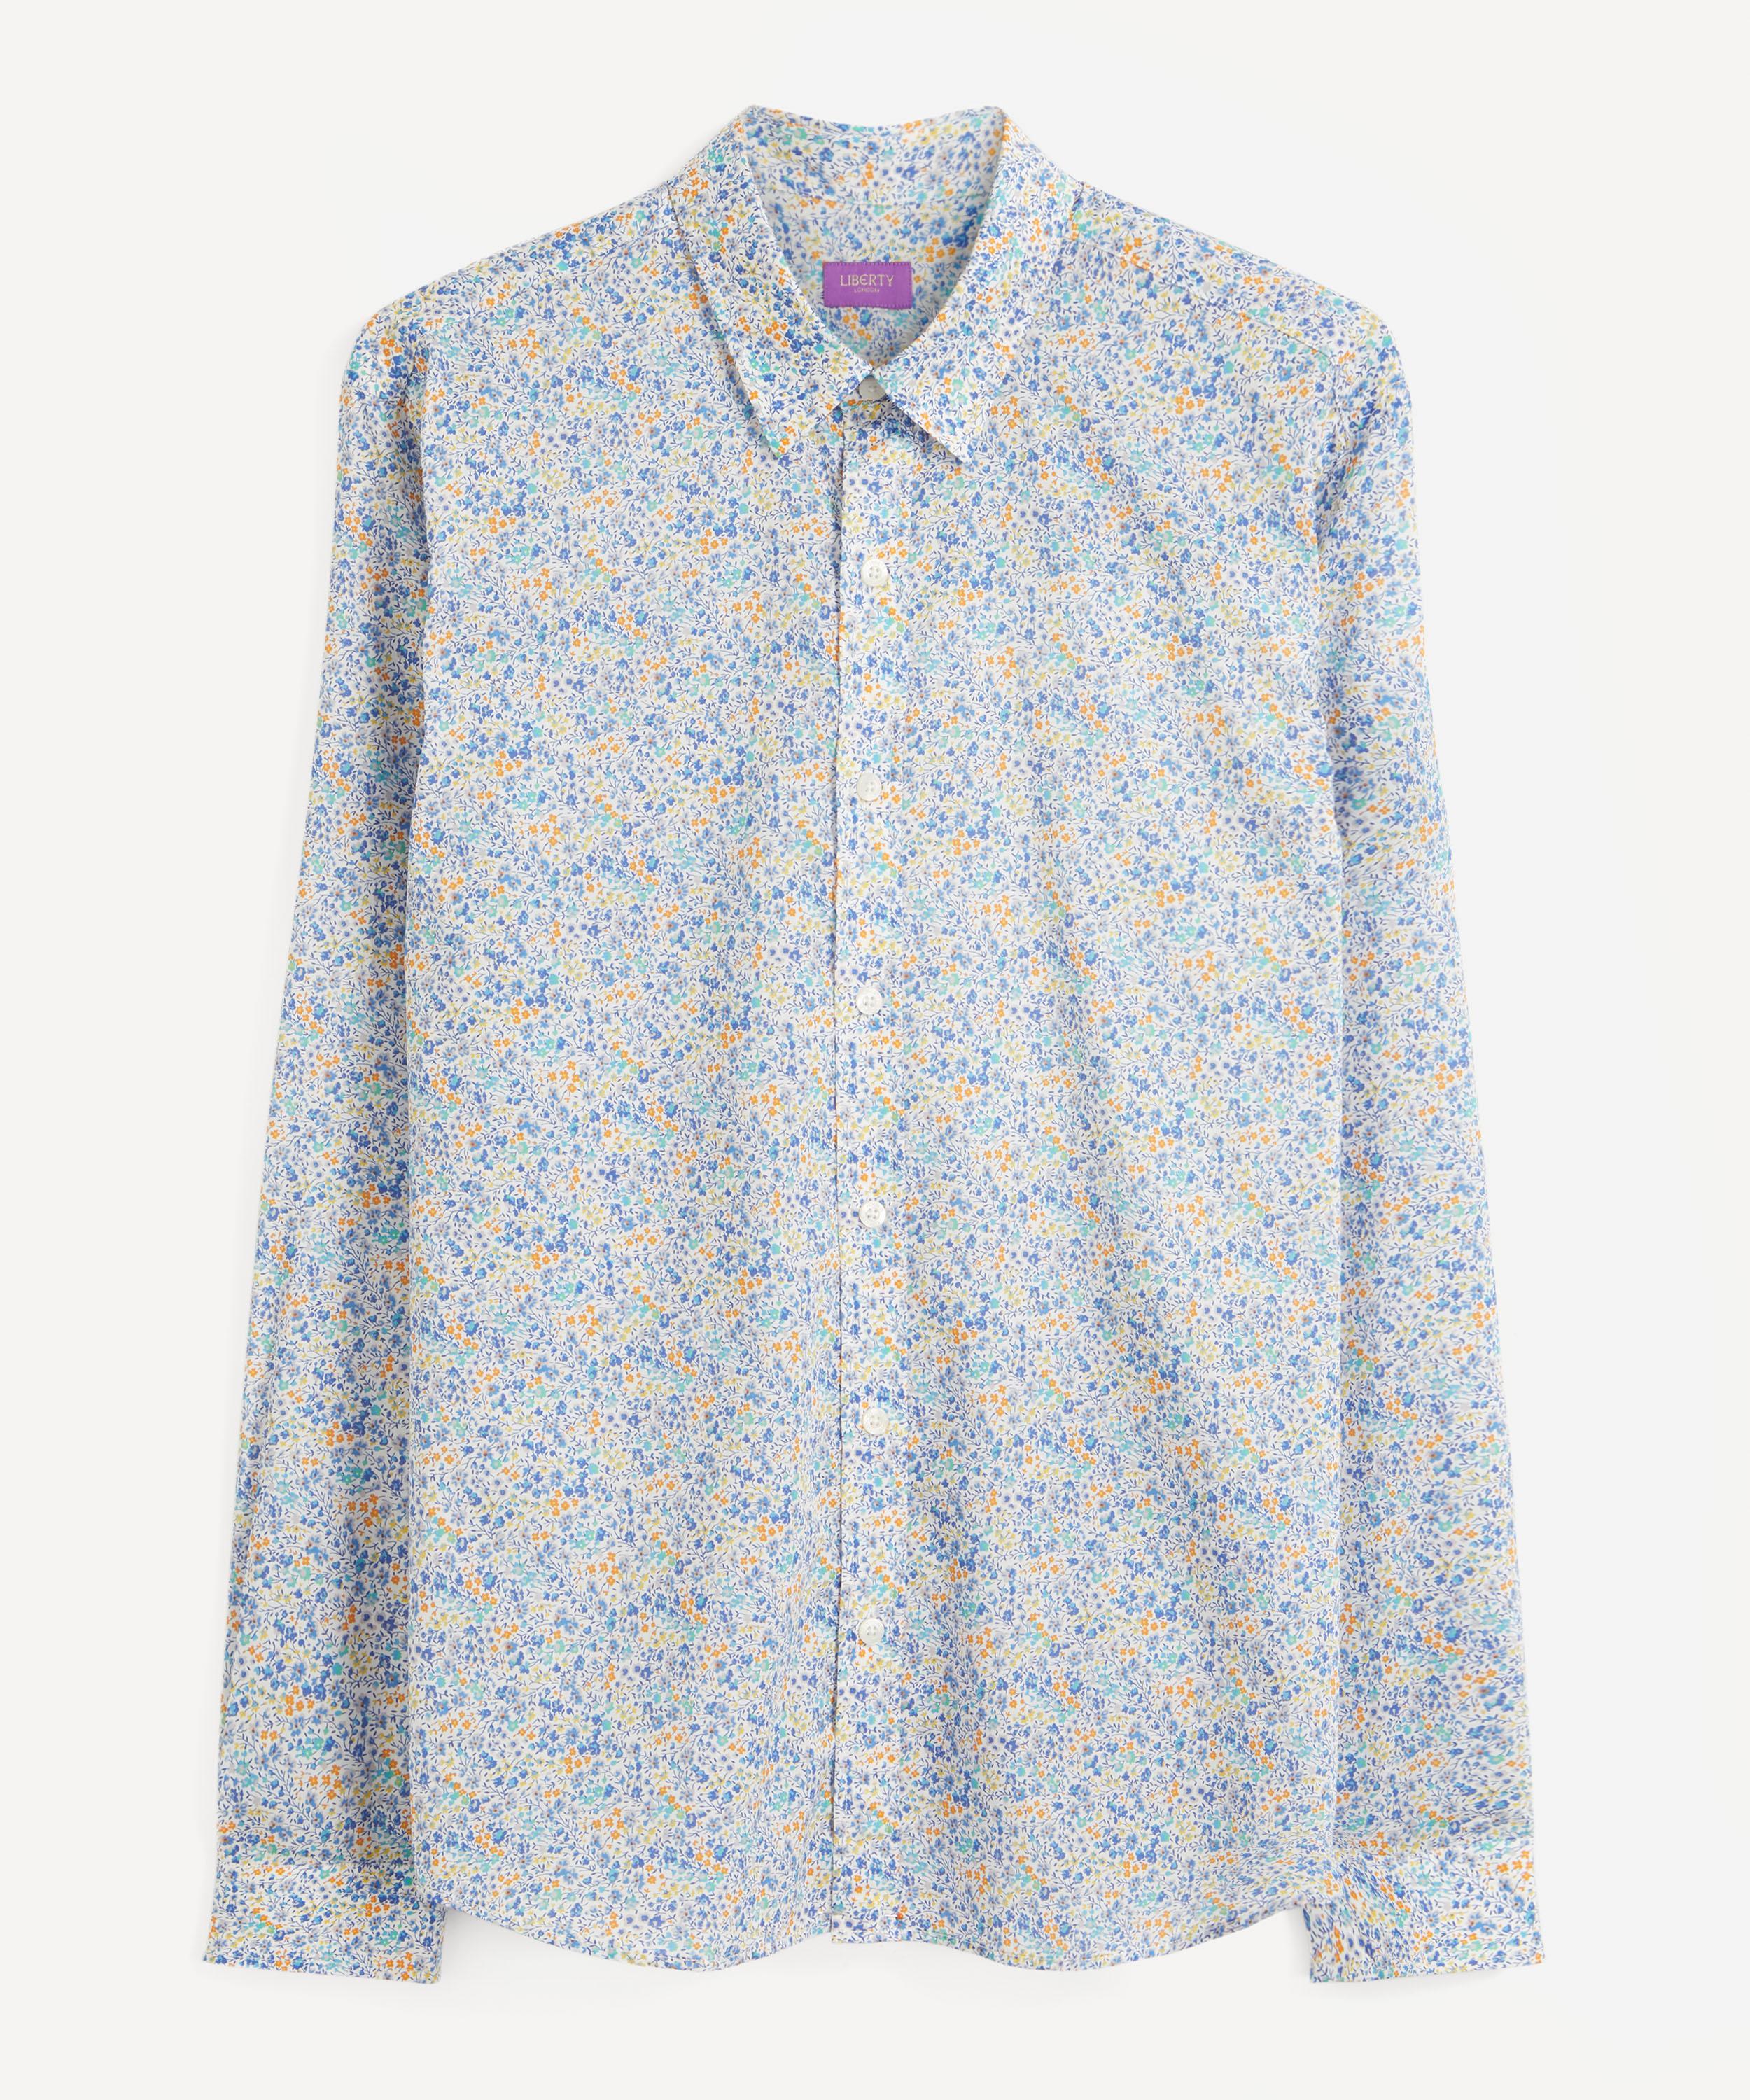 Liberty Phoebe Tana Lawn™ Cotton Casual Classic Slim Fit Shirt In Blue